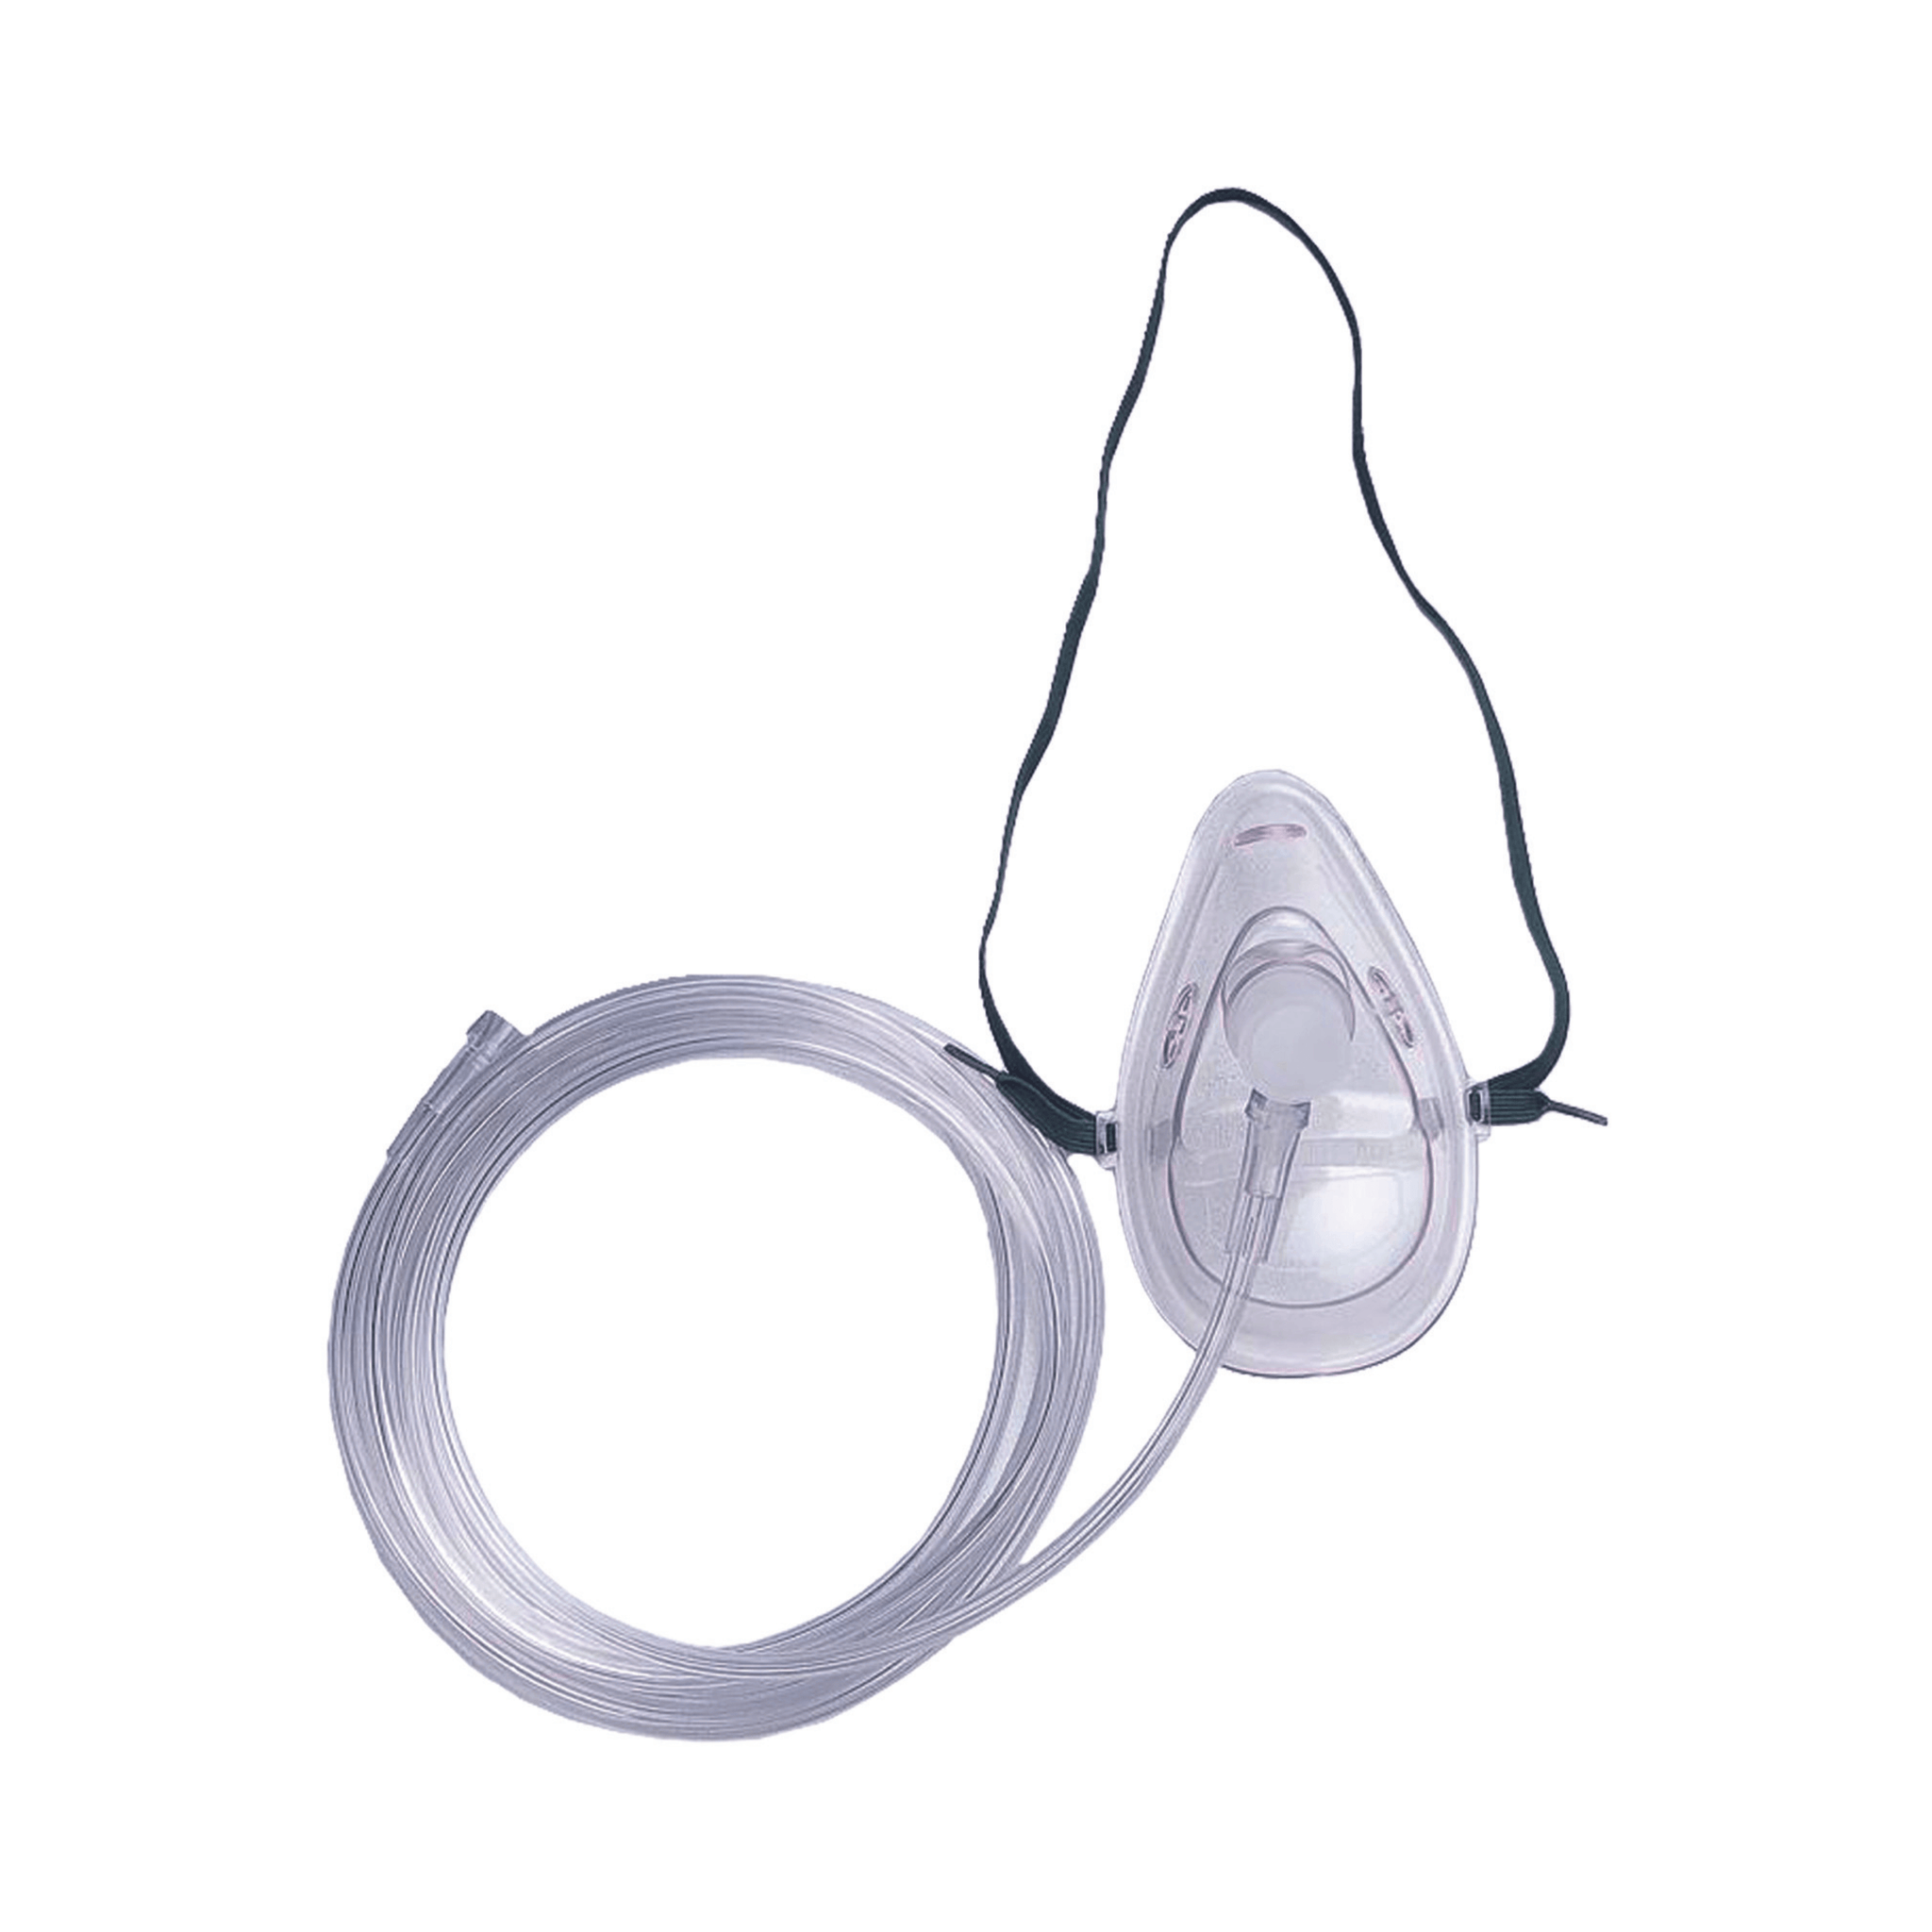 Oxygen Mask with Tubing- Child